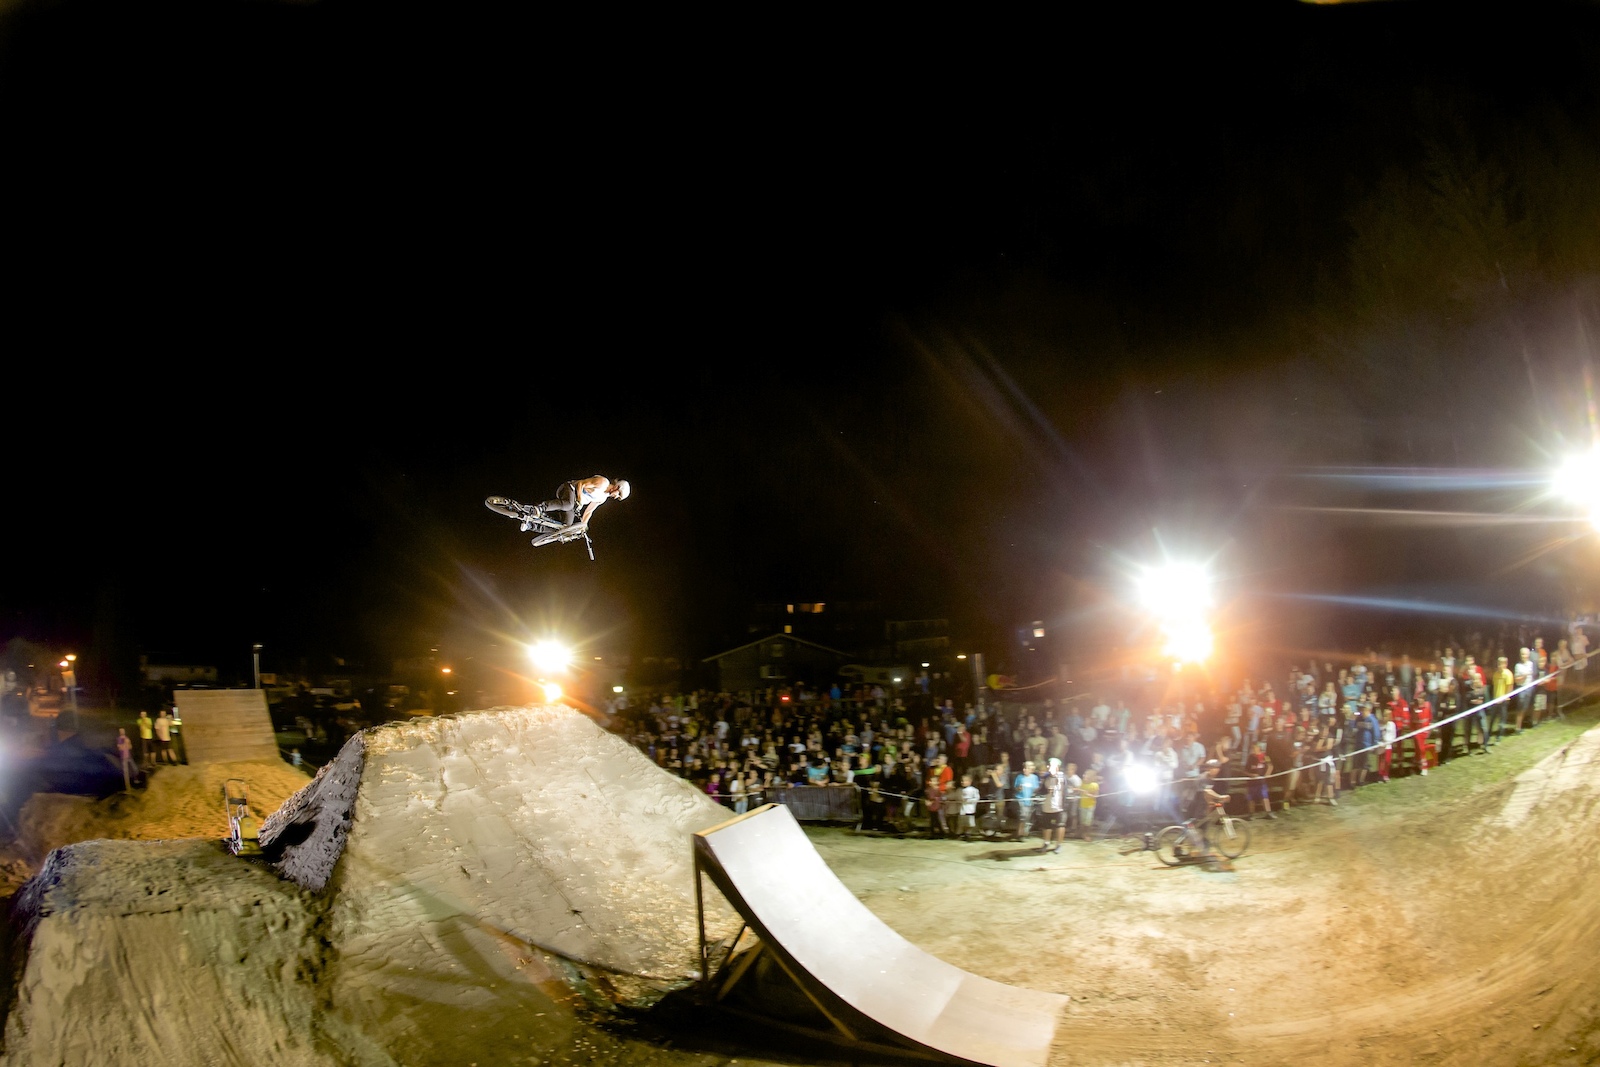 360OneHandTable during the "Trailmaster Challenge" Circus Dirt session. Picture by Markus Greber